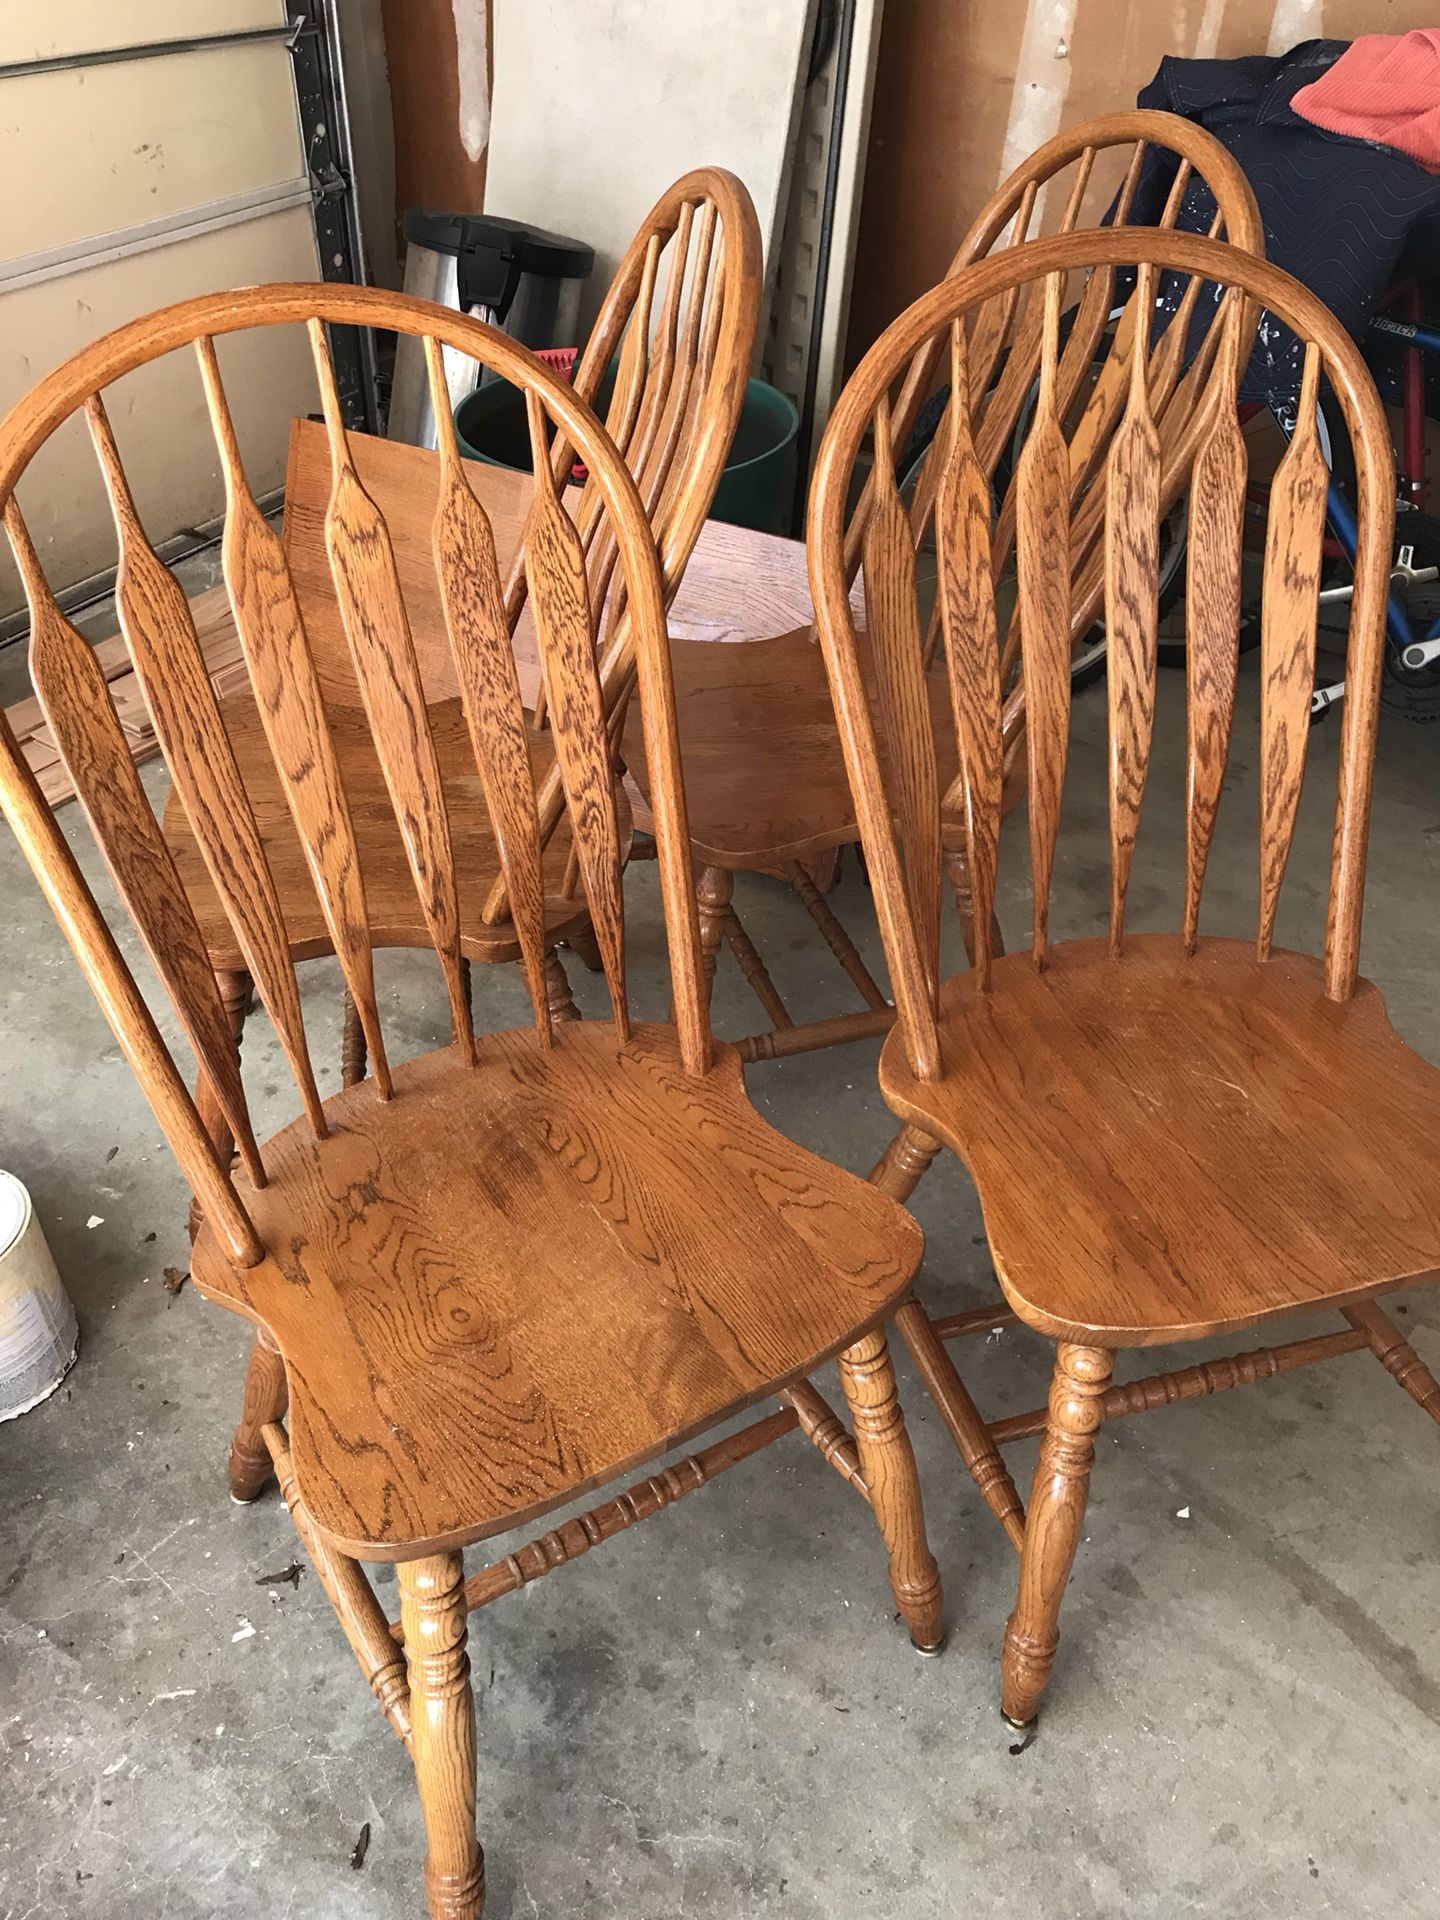 4 Wooden Dining Chairs